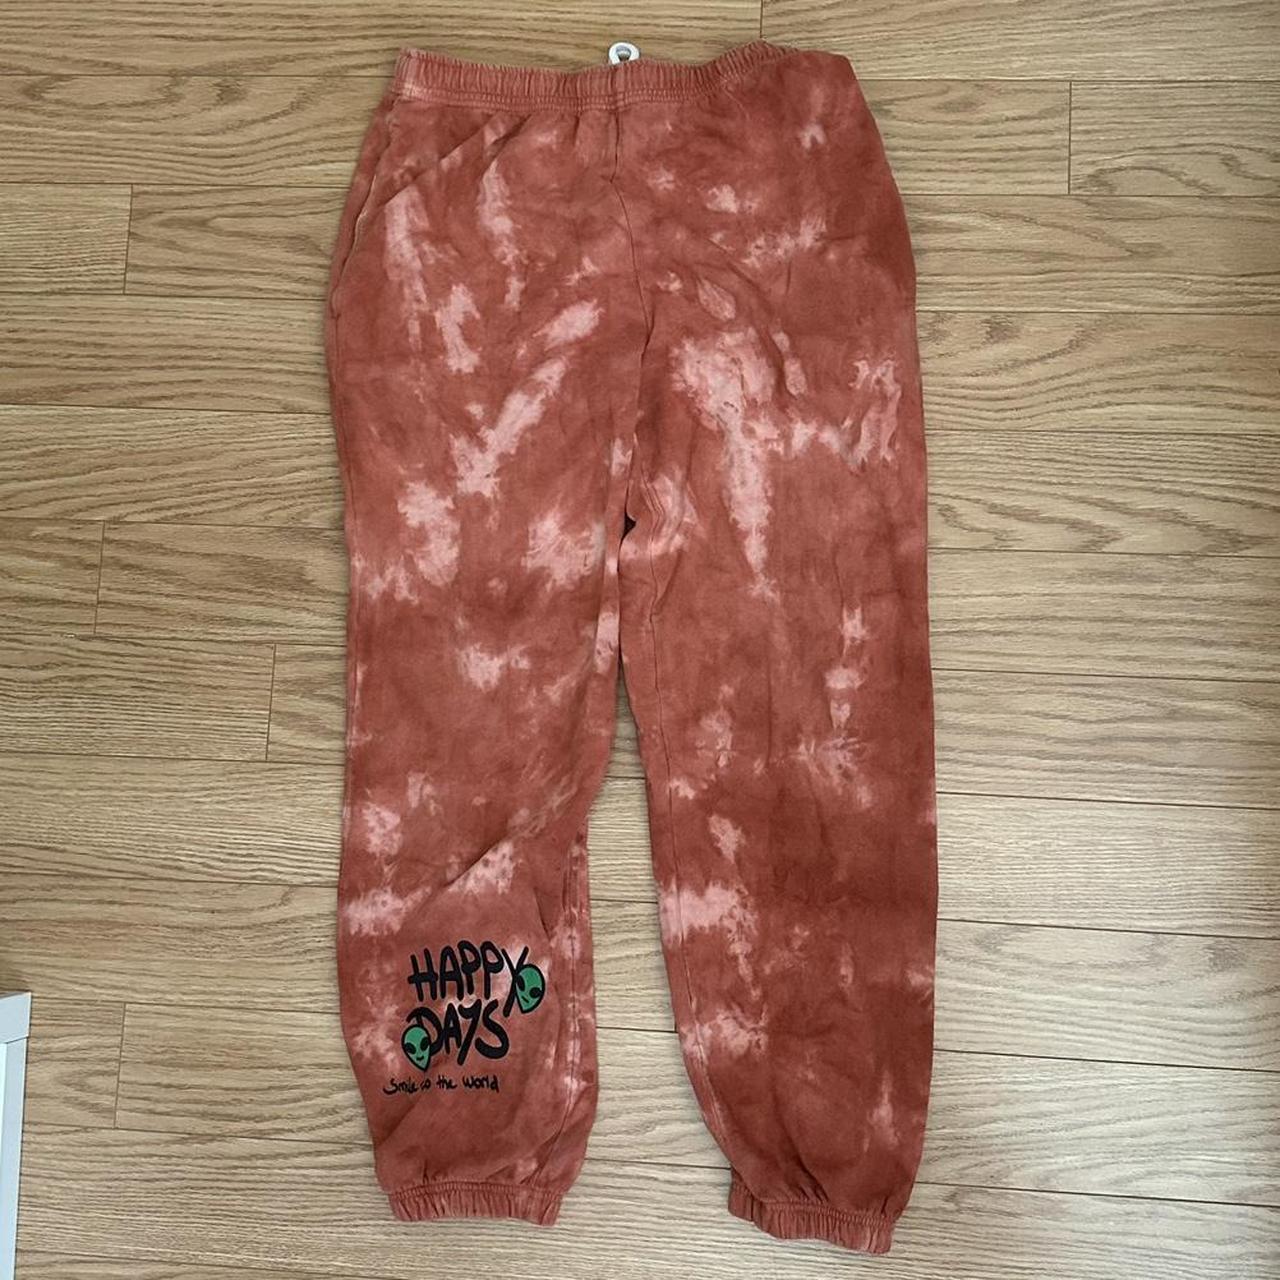 URBAN OUTFITTERS OUT FROM UNDER GOOD DAYS PINK SWEAT PANTS SIZE MEDIUM